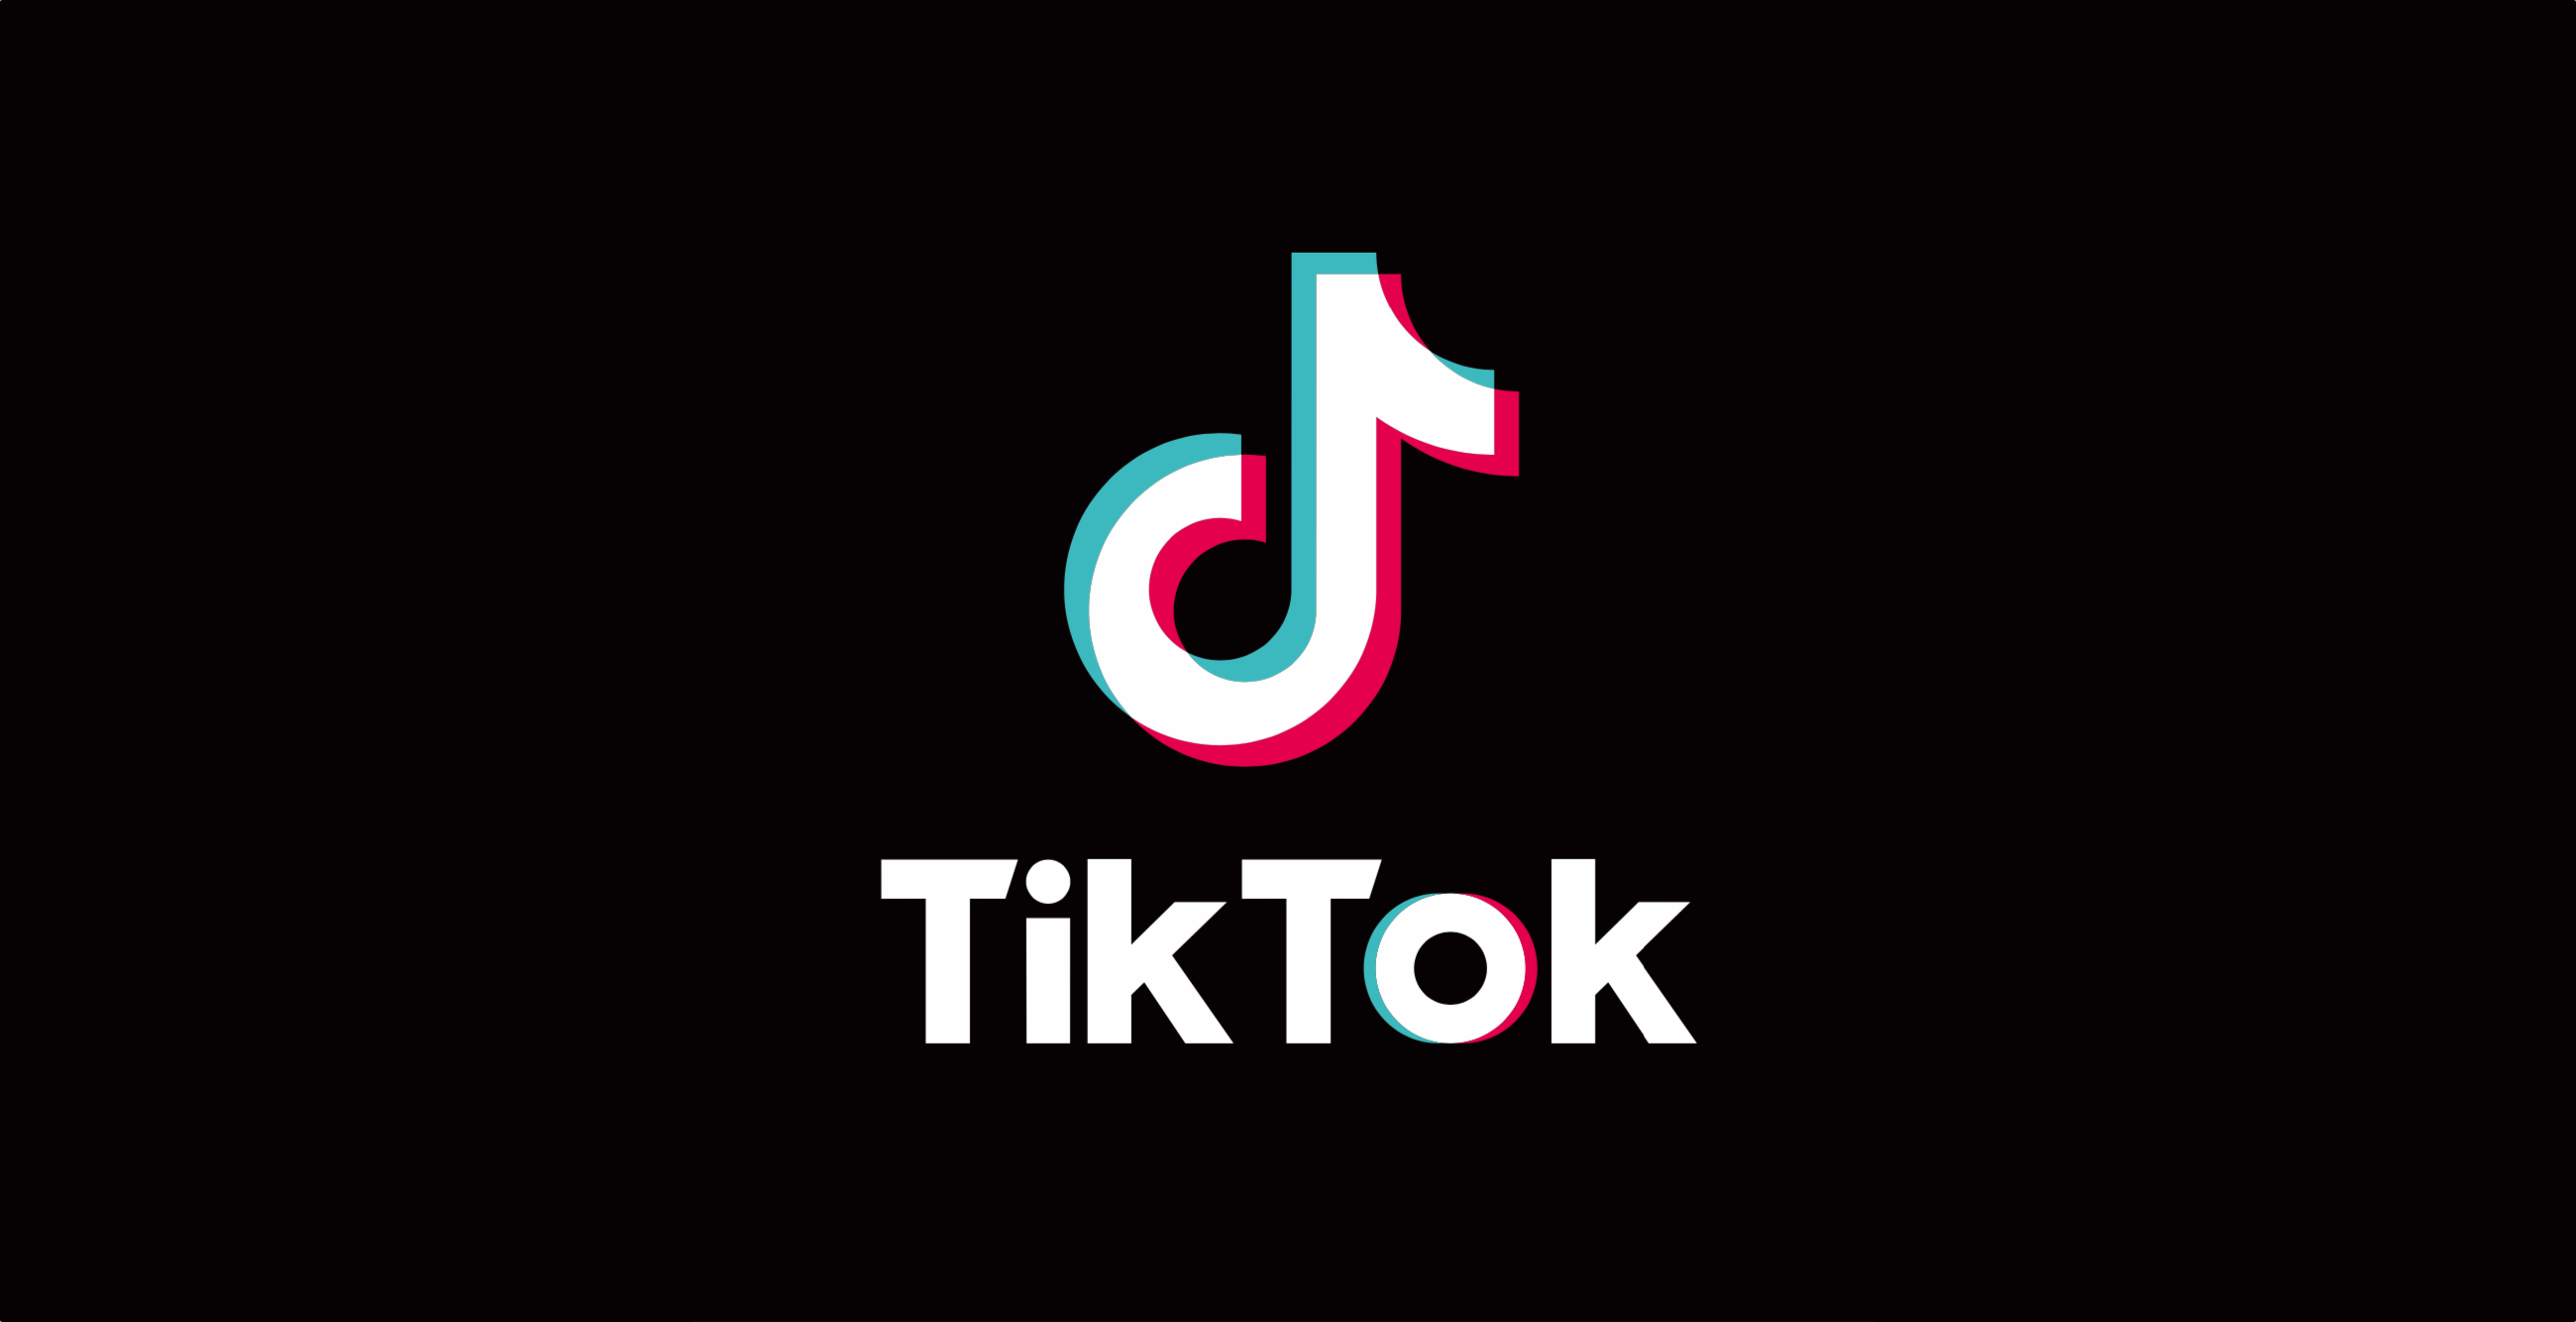 Convert TikTok Videos to Live Wallpapers for a More Animated Home or Lock  Screen « Smartphones :: Gadget Hacks